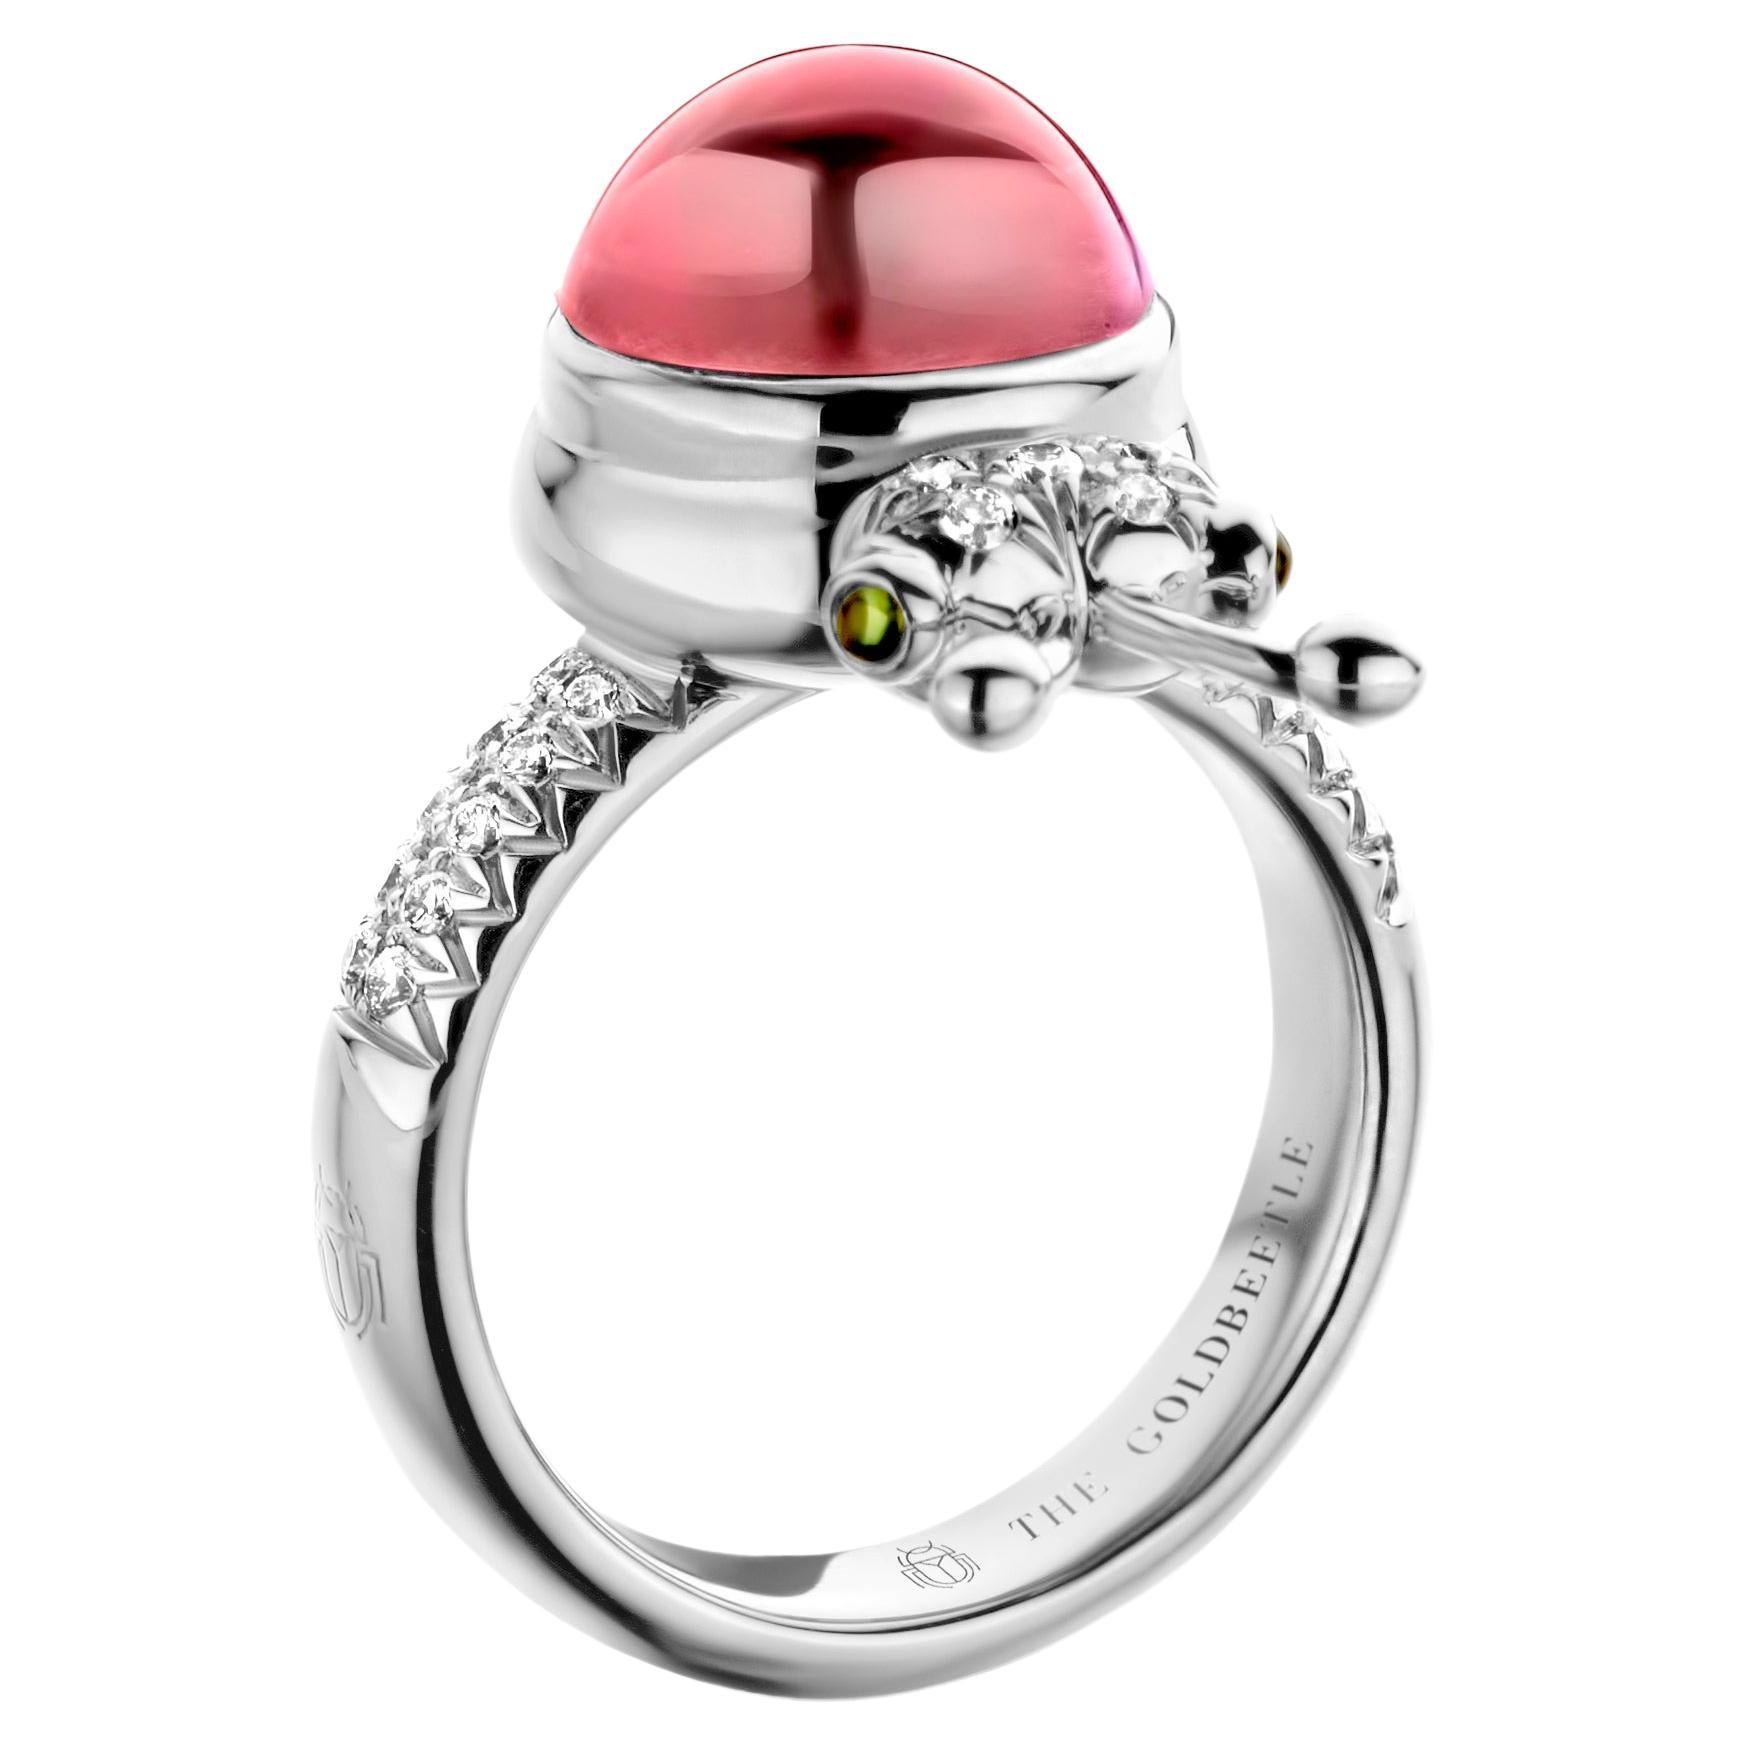 One-of-a-kind lucky beetle ring in 18-Karat white gold 10g set with the finest natural diamonds in brilliant cut 0,23 Carat (VVS/DEF quality) one natural, pink tourmaline in round cabochon cut 6,00 Carat and two tsavorites in round cabochon cut.